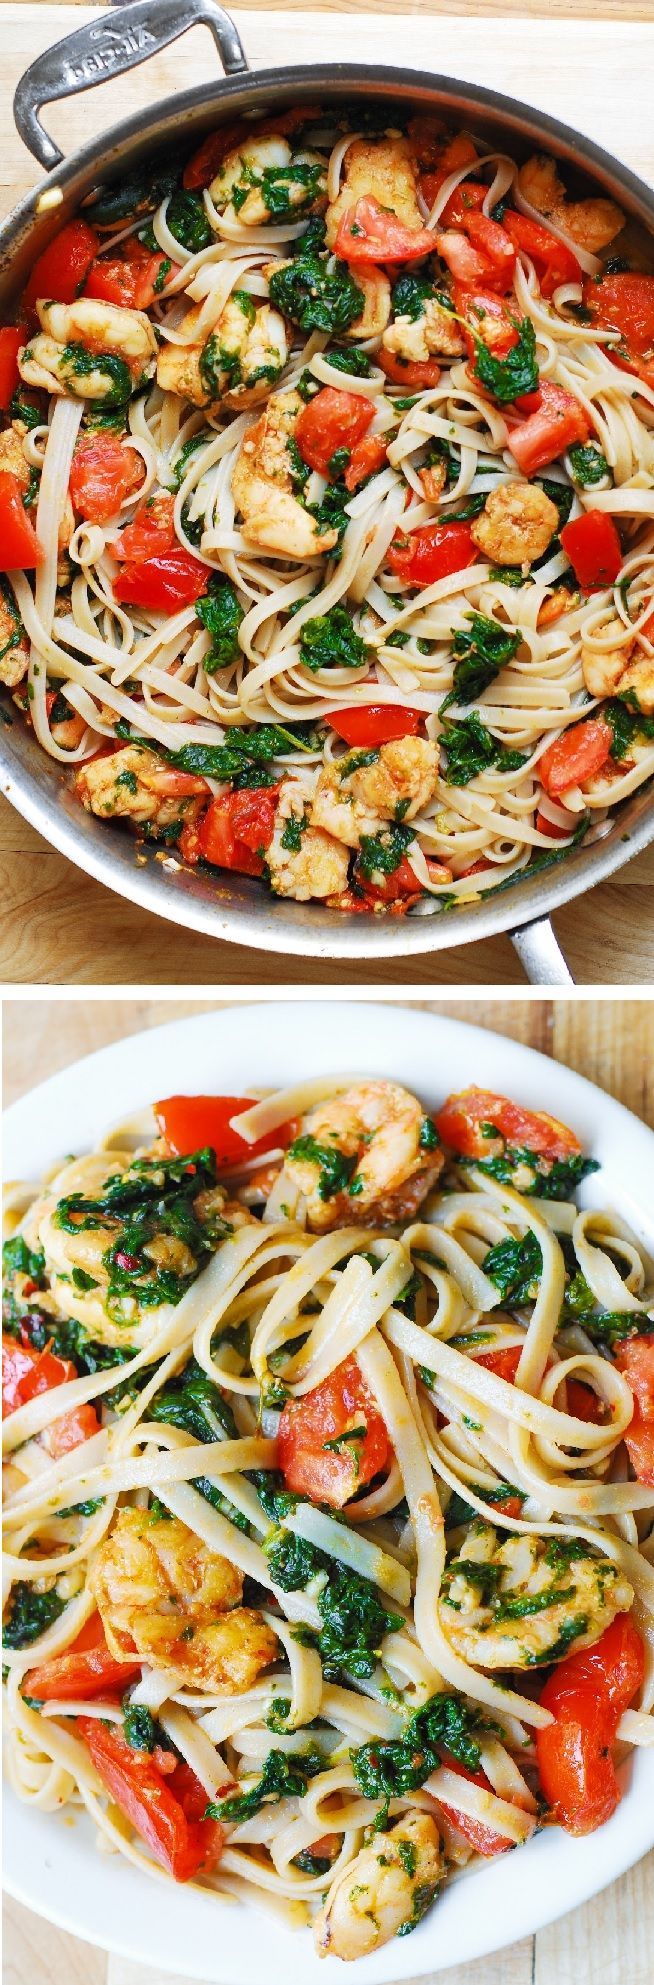 Shrimp, fresh tomatoes, and spinach with fettuccine pasta in garlic butter sauce.